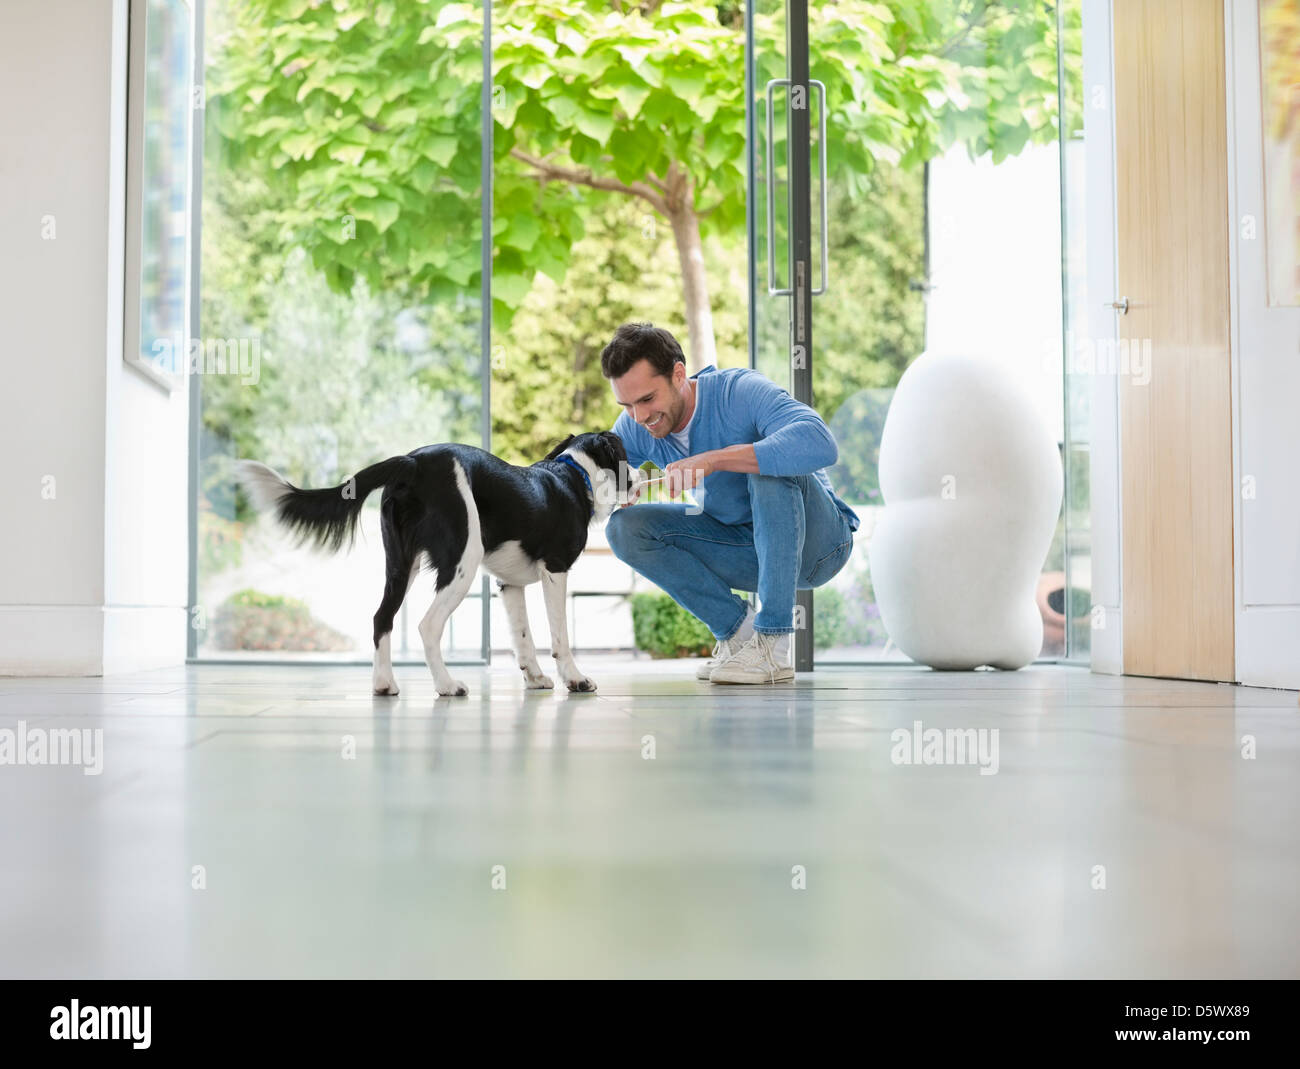 Smiling man petting dog in kitchen Banque D'Images